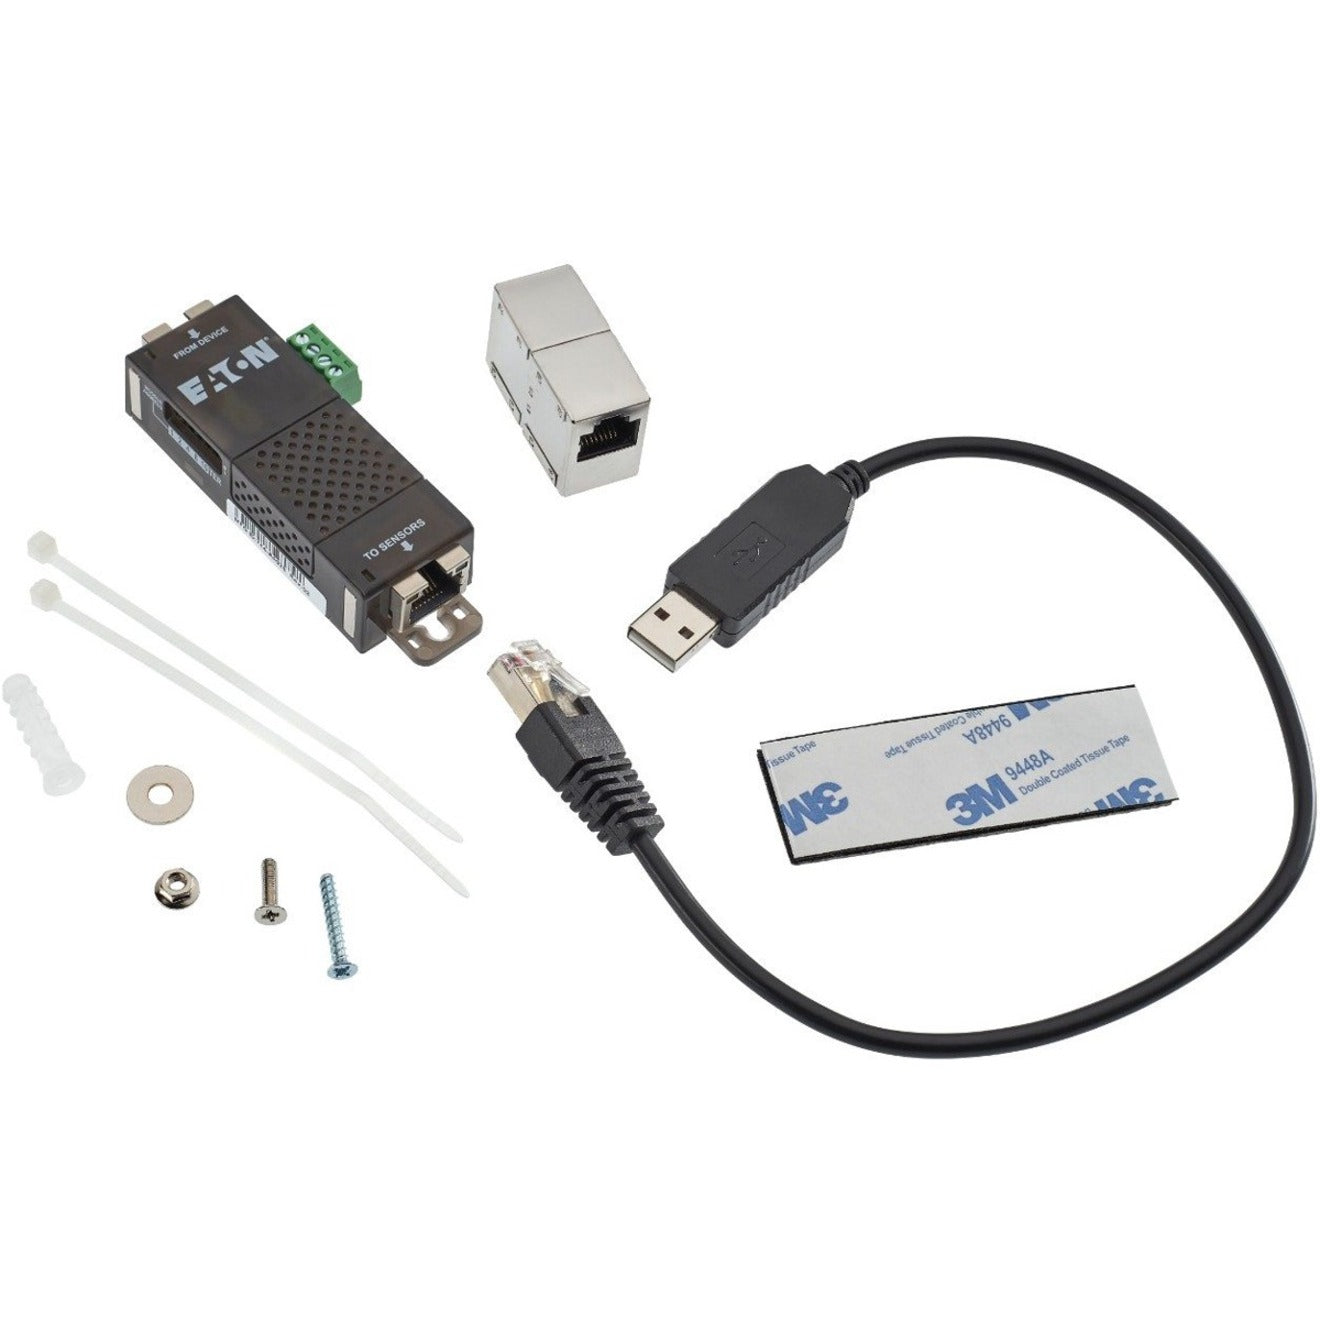 Eaton EMPDT1H1C2 Environmental Monitoring Probe Gen 2 for Temperature and Humidity Conditions